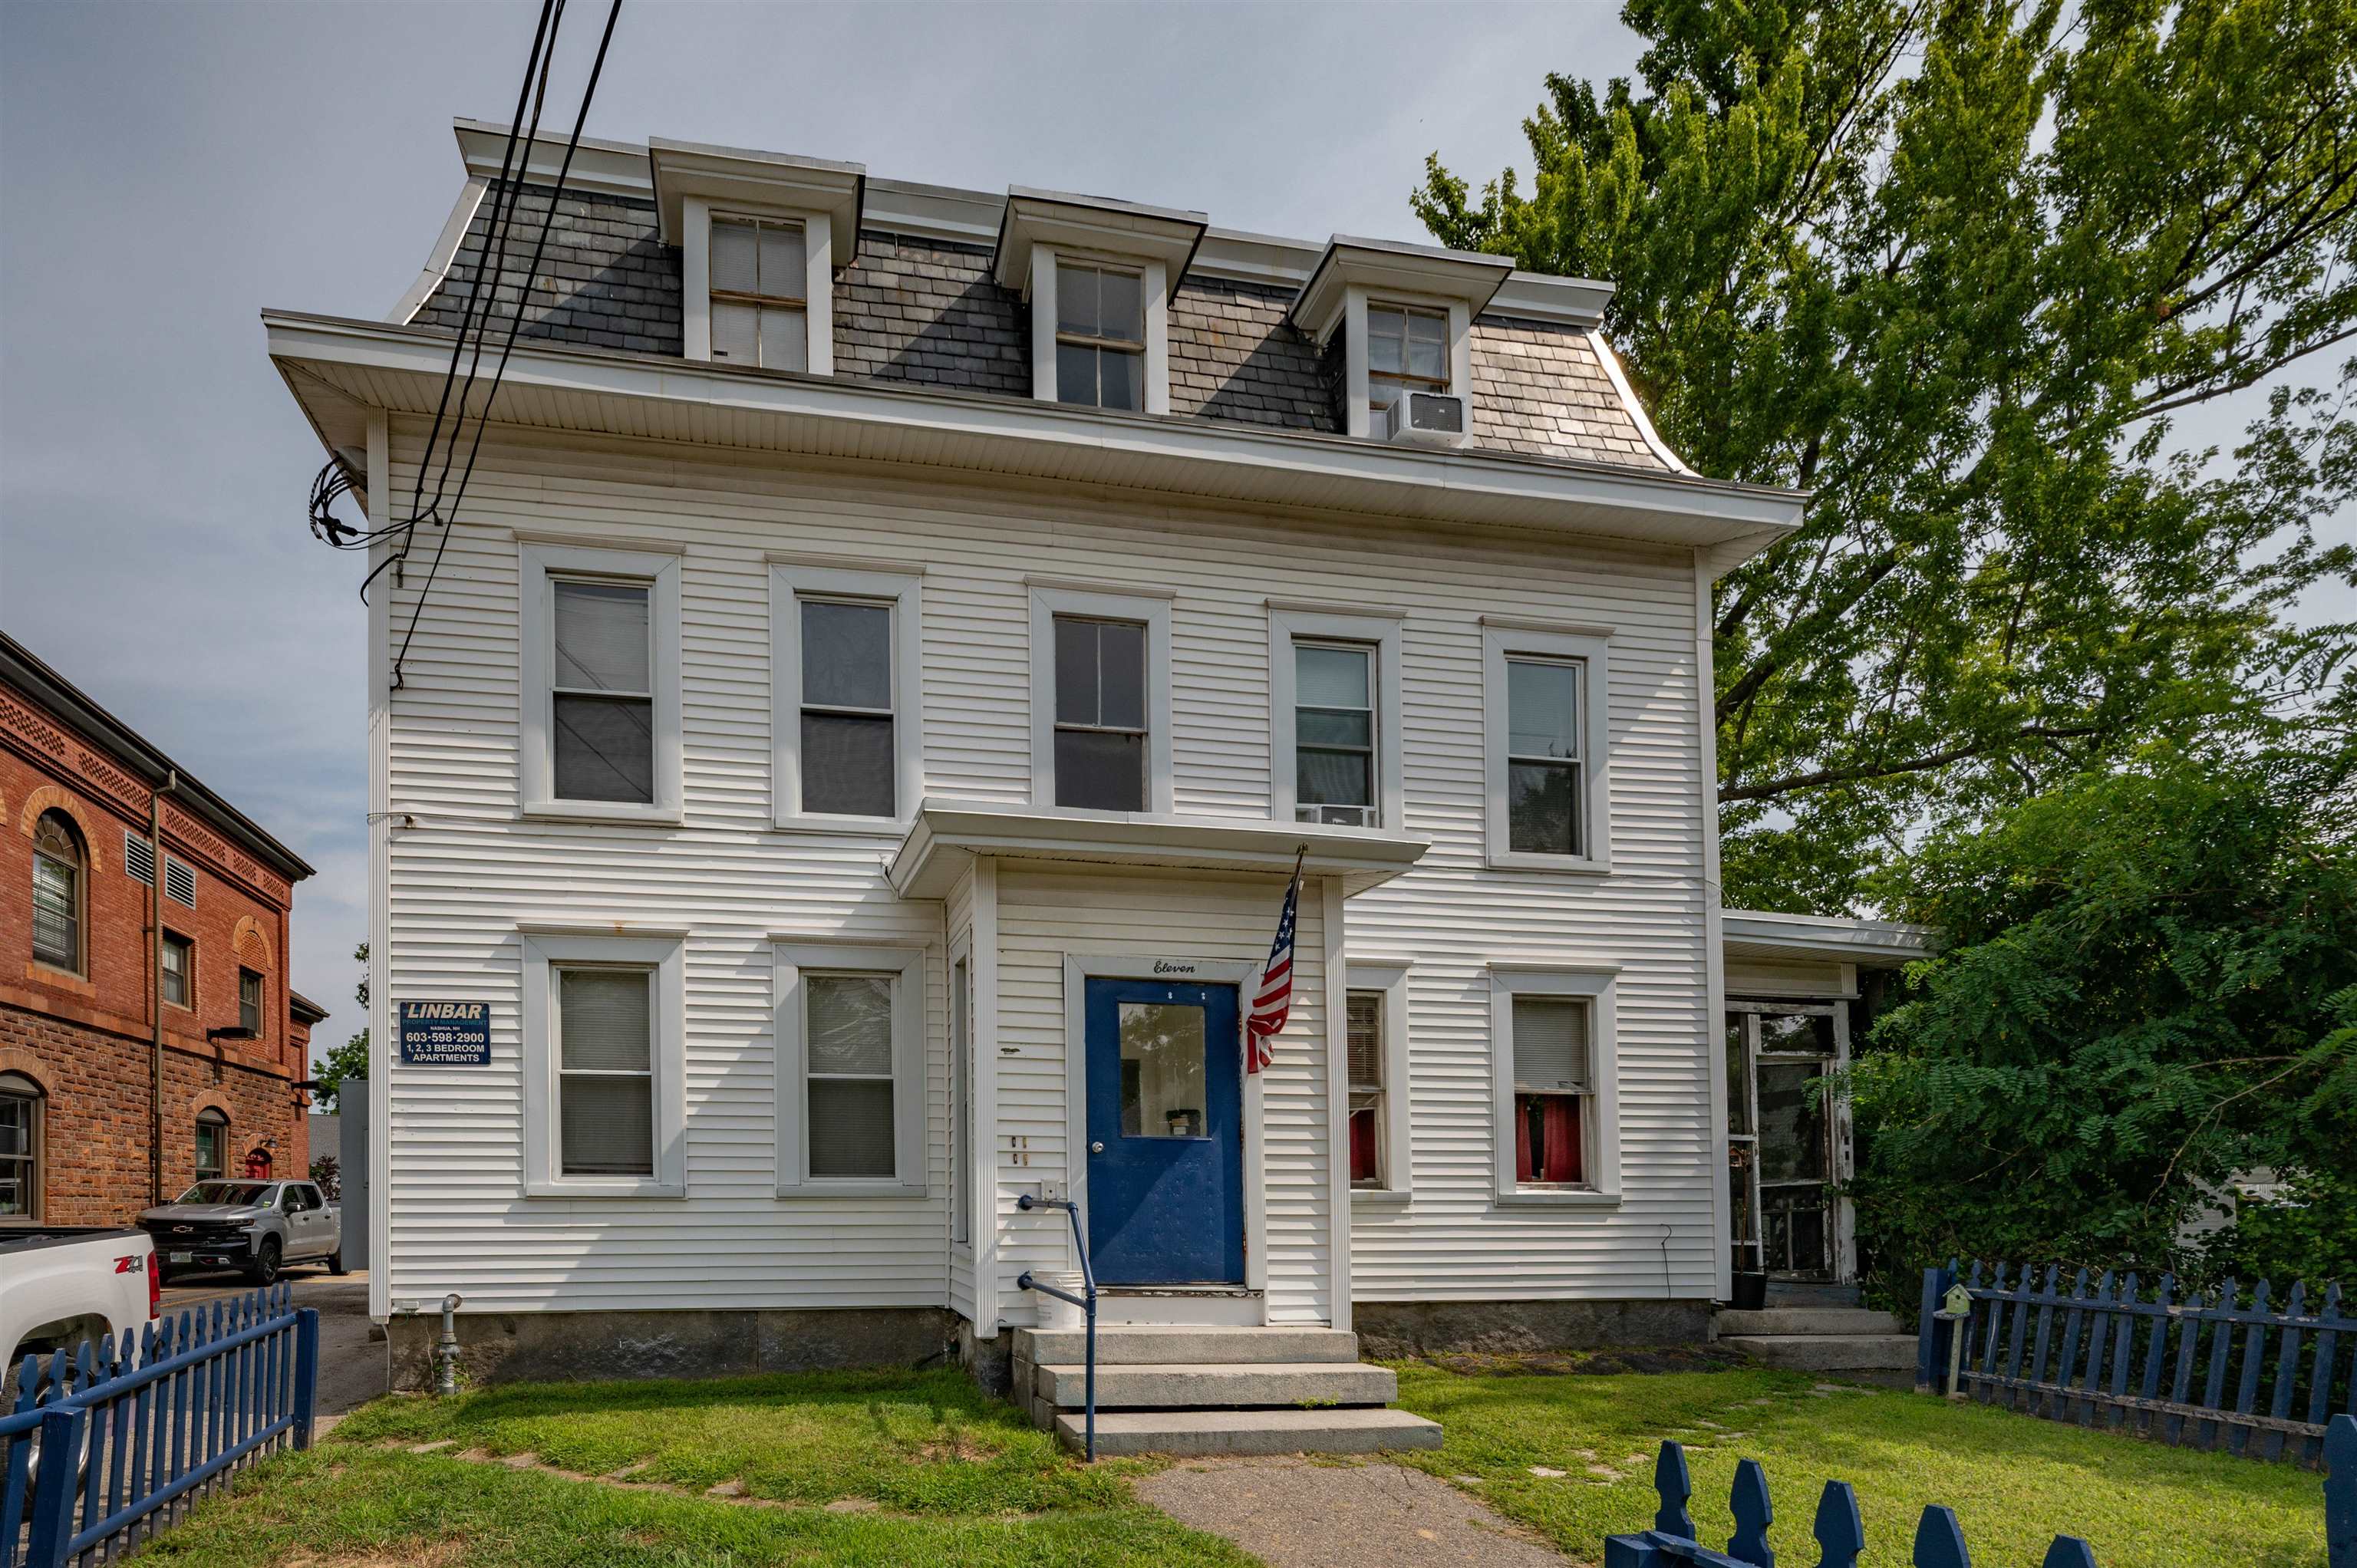 Nashua, Hudson Multi Portfolio Listing 208 Units: studio, 1,2 and 3 and 4 BR units Garage rentals and parking space  rental income GRI $3M+ A true Turn-Key investment. All buildings in good condition and most units have lead certs. 49 Studios, 54 1BR's, 57 2BR's, 31 3BR's,13 4BR's. 3 Commercial office rentals. $30,000,000 price includes "LINBAR",  one of Nashua's Premier Property Management Companies with over 35 years of experience. Also including office and building!